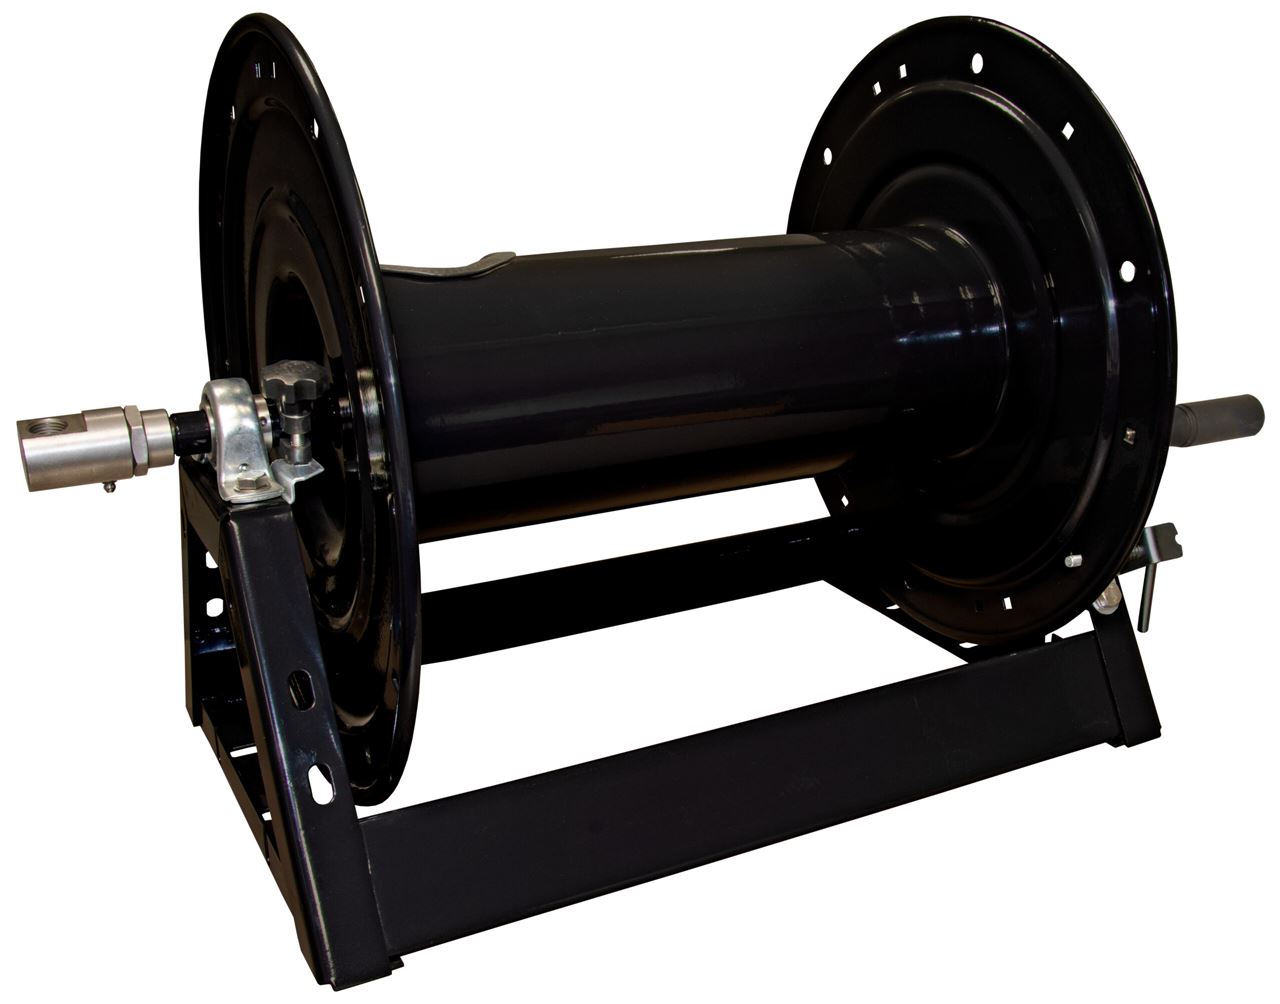 https://www.pwmall.com/content/images/thumbs/0058426_38-x-450-34-x-250-industrial-hose-reel-a-frame-5000-psi-250-f.jpeg